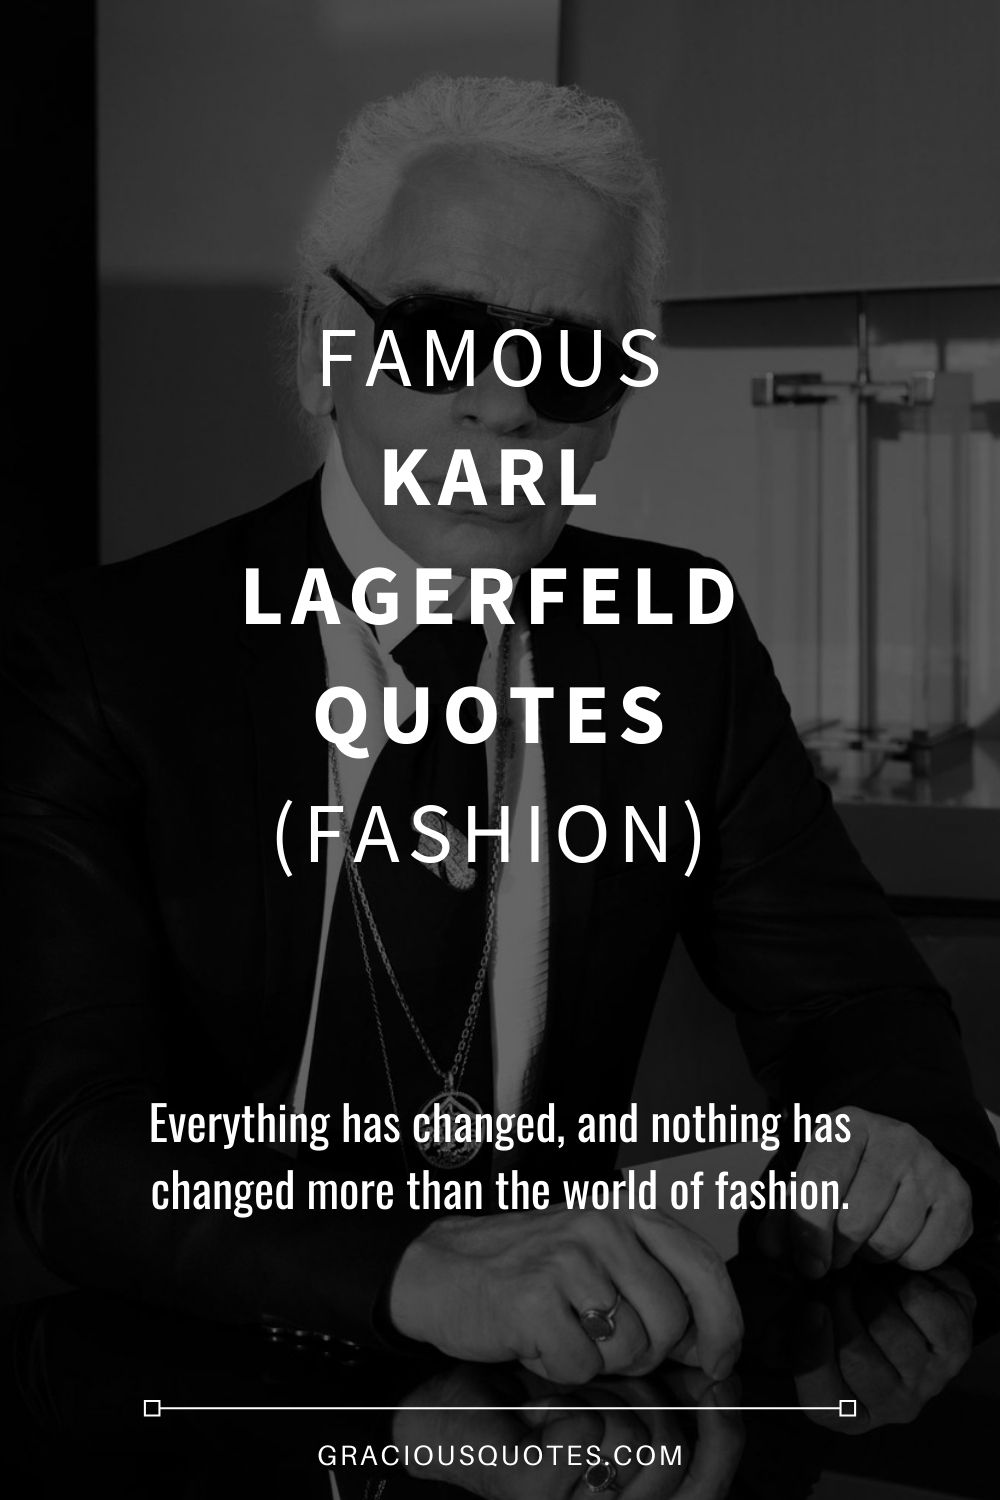 57 Iconic Fashion Quotes to Dress By | Inspirational quotes motivation,  Inspirational quotes, Fashion quotes